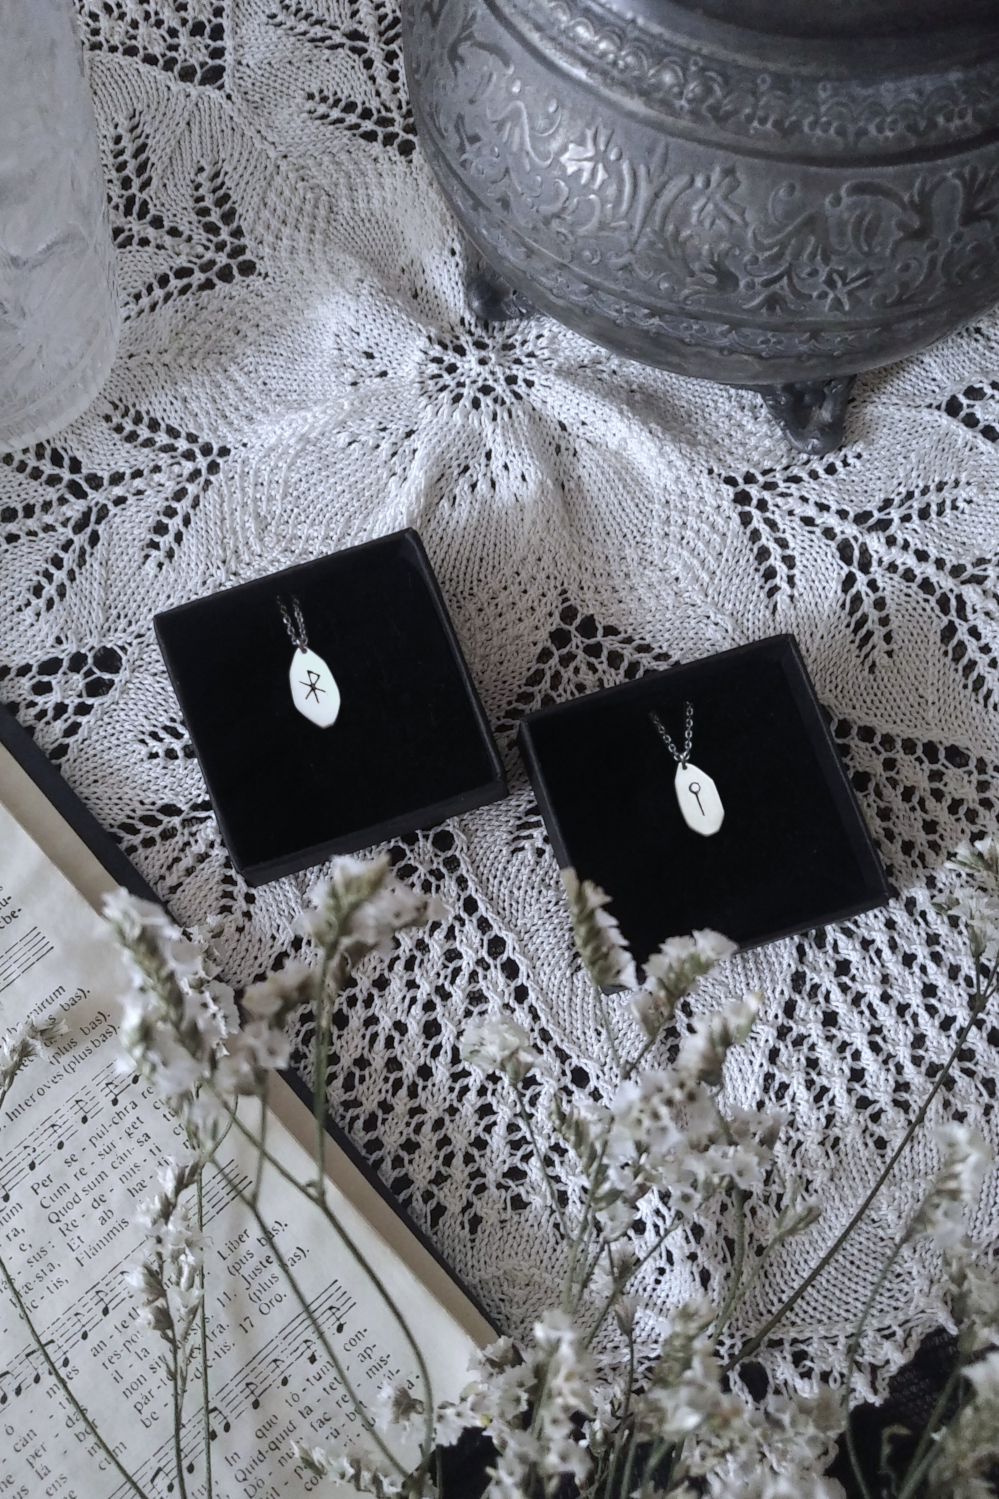 Silver Runic amulets with love Bind-Rune and Sol medieval rune on a doily